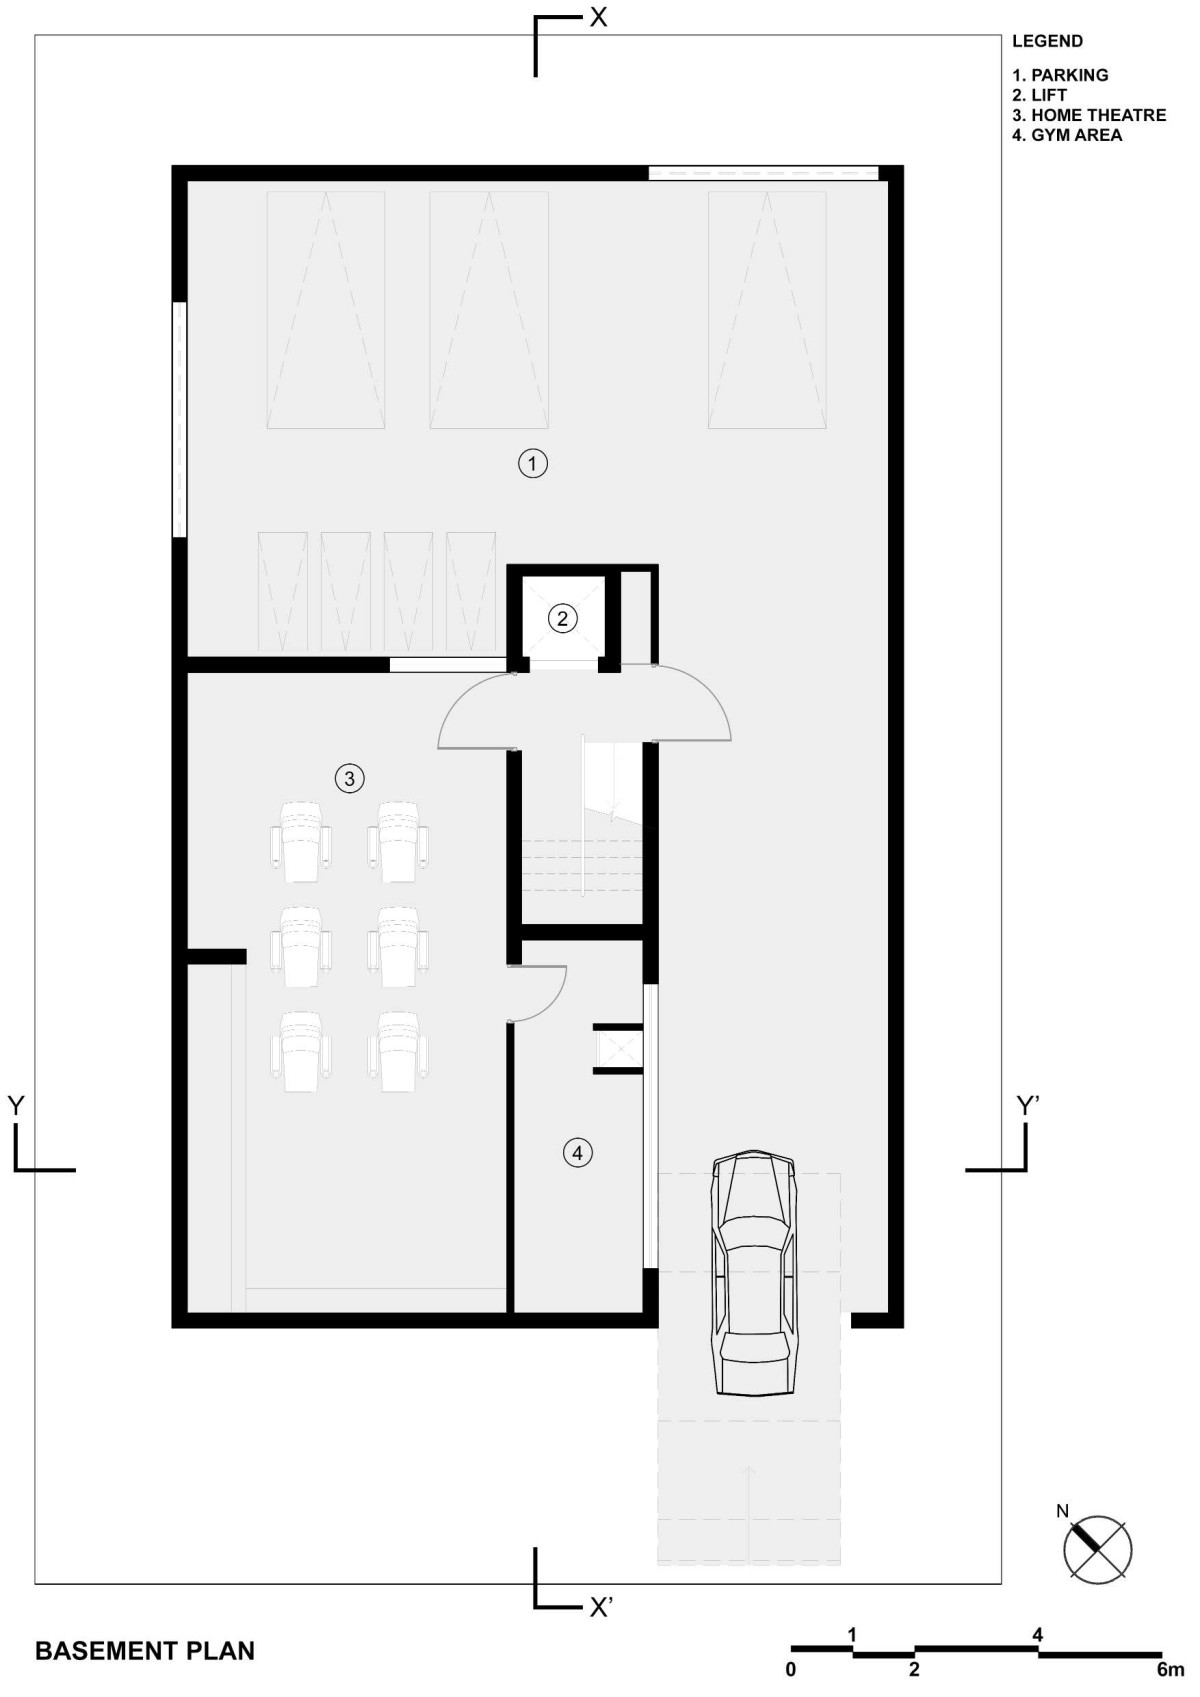 Basement floor plan of Linear House by Int-Hab Architecture + Design Studio